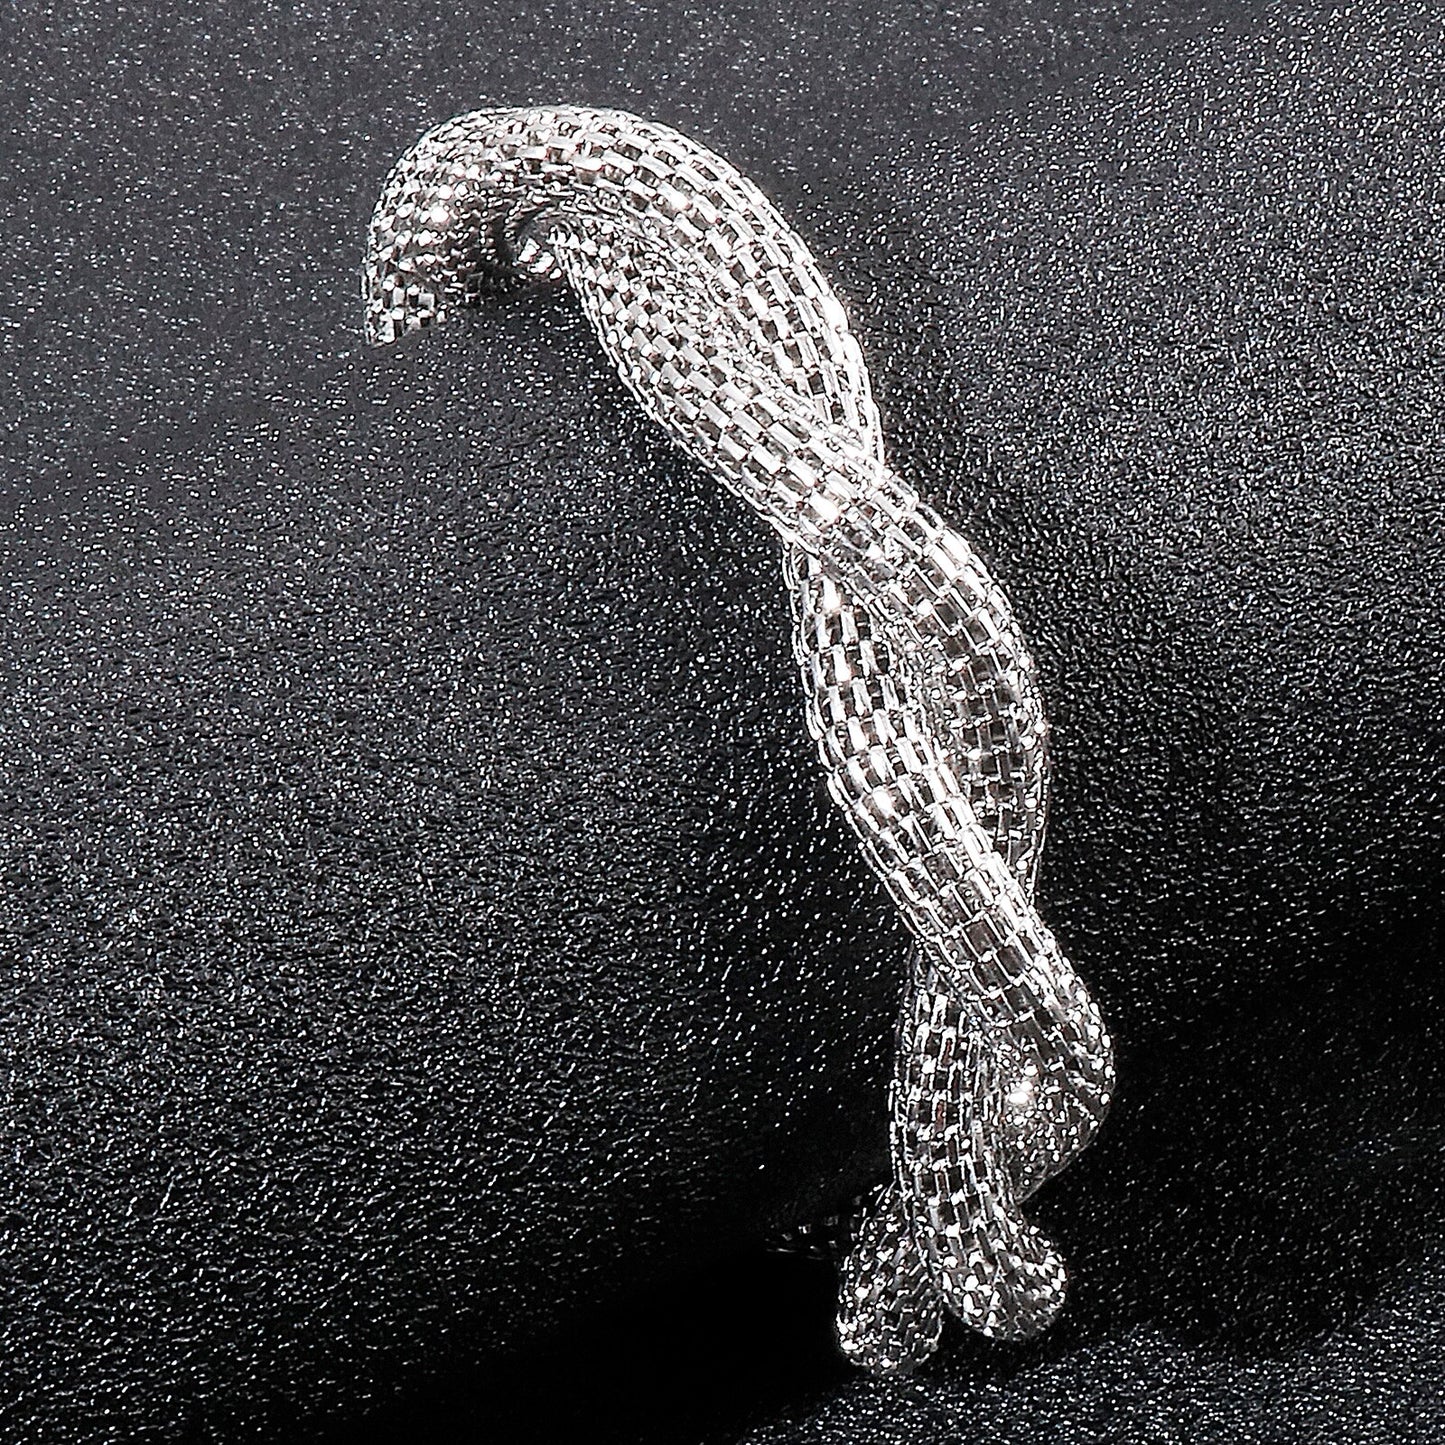 Snake Double Link Chain Stainless Steel Braided Bracelet